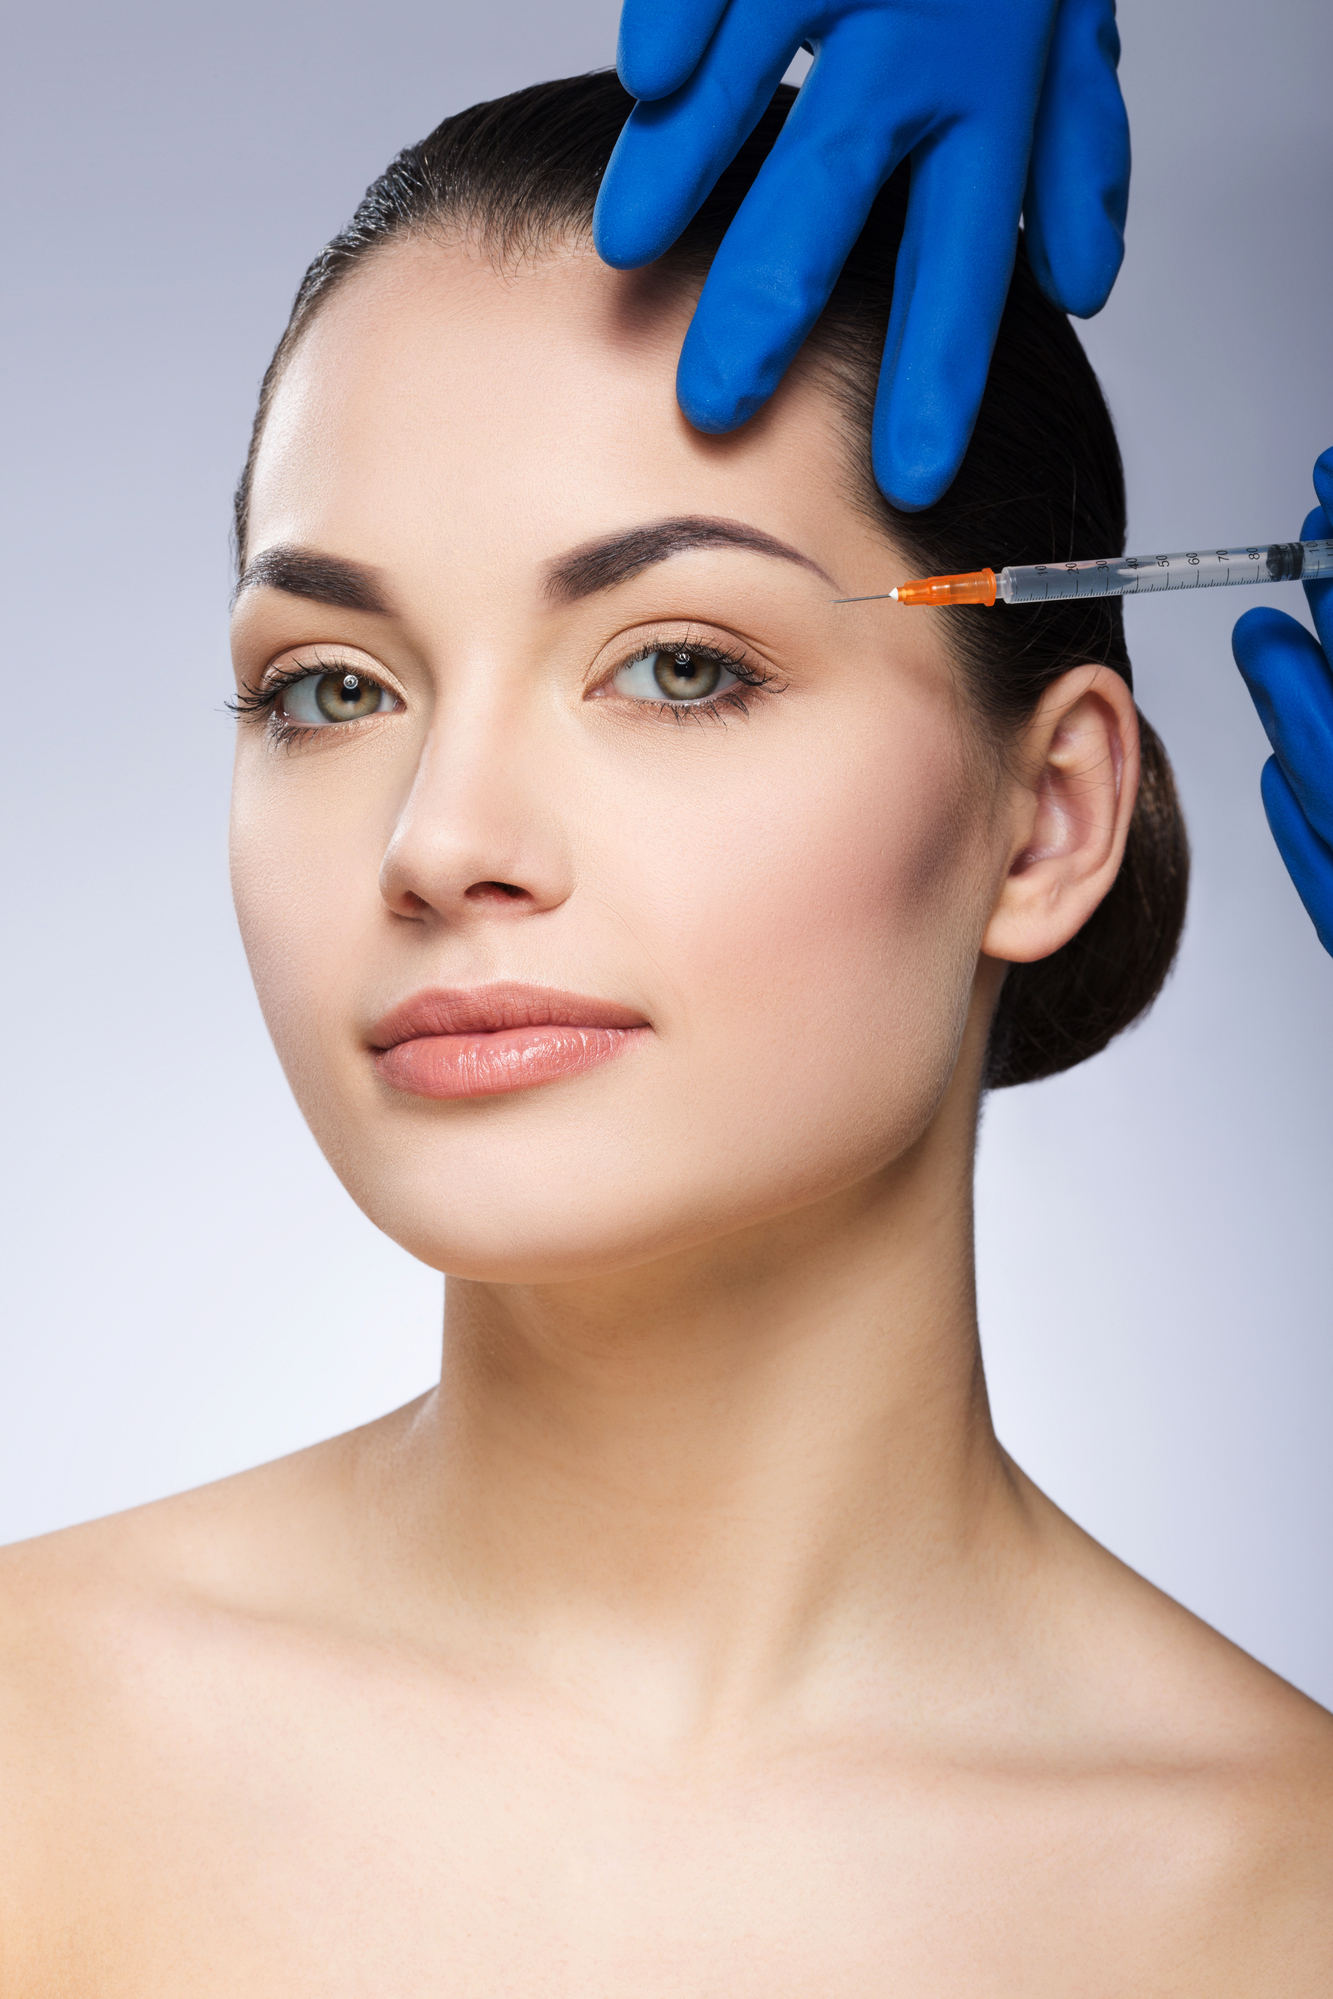 The Effects of too Much Botox on Your Body